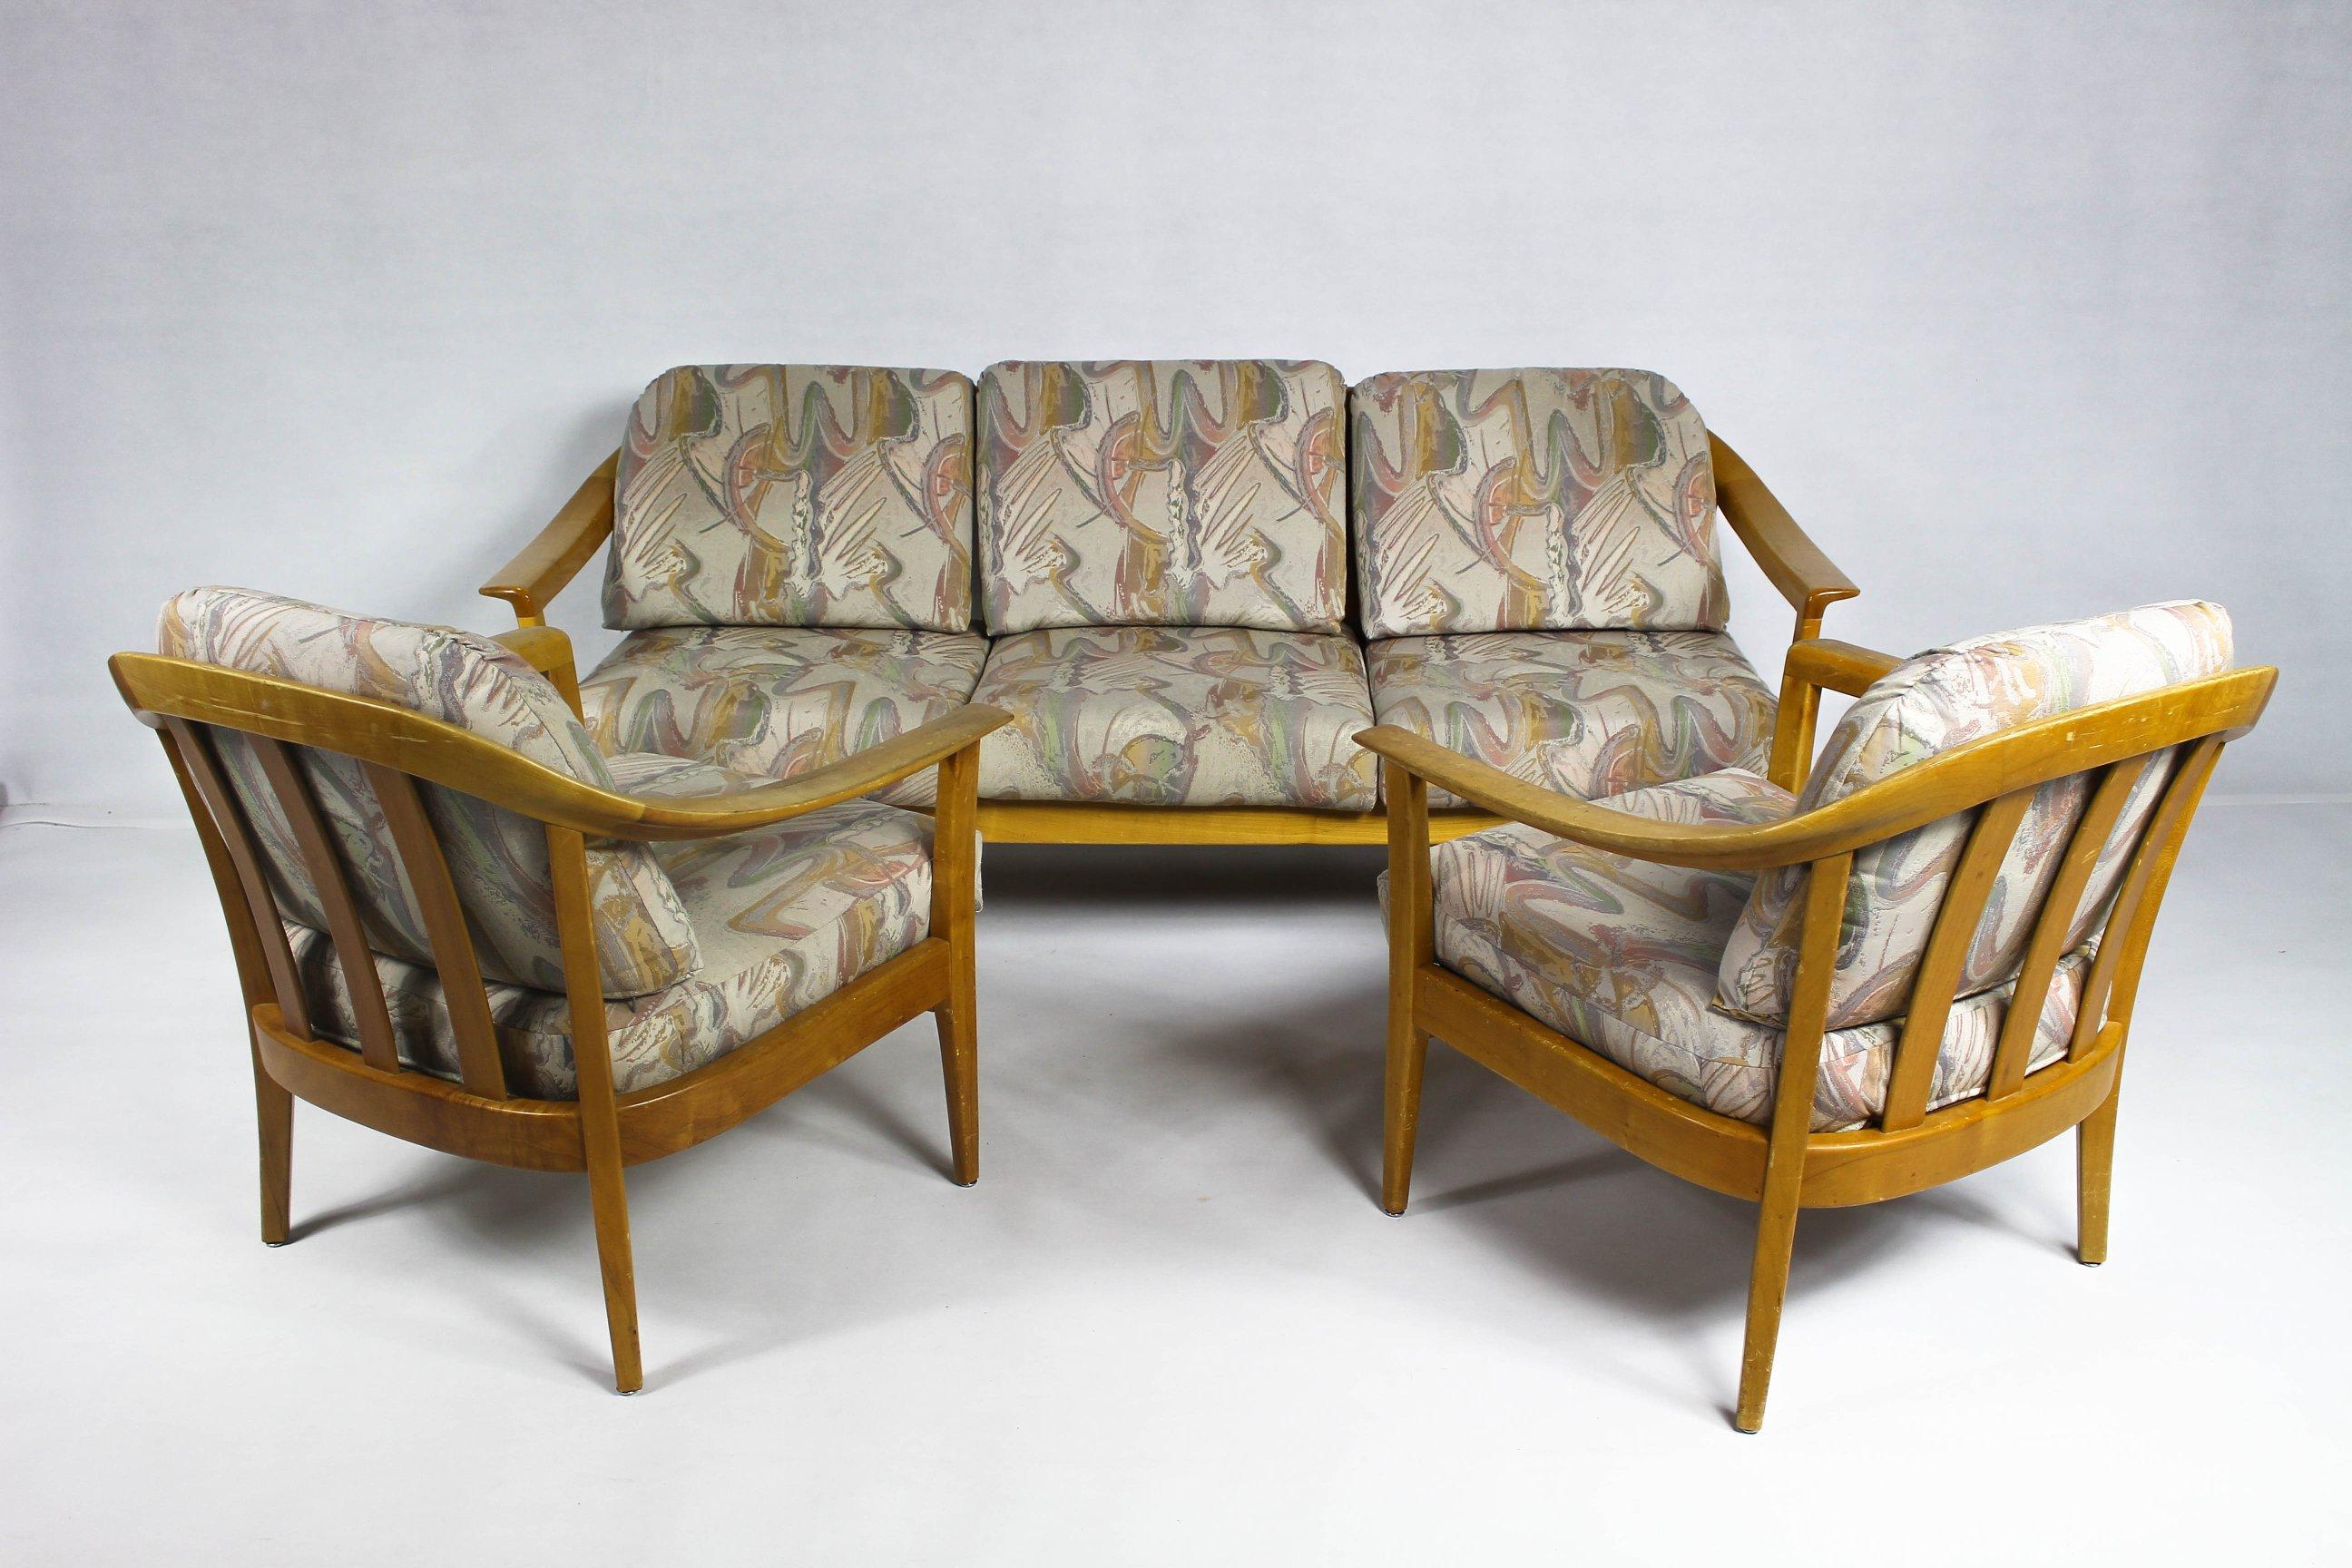 This set of sofa + pair of armchairs + coffee table was designed in 1960.
It features solid cherrywood, and loose-fitting cushions with patterned covers.
Measures: Sofa:
Length 190 cm Height 80 cm Depth 78 cm

Armchairs:
Length 77 cm Depth 60